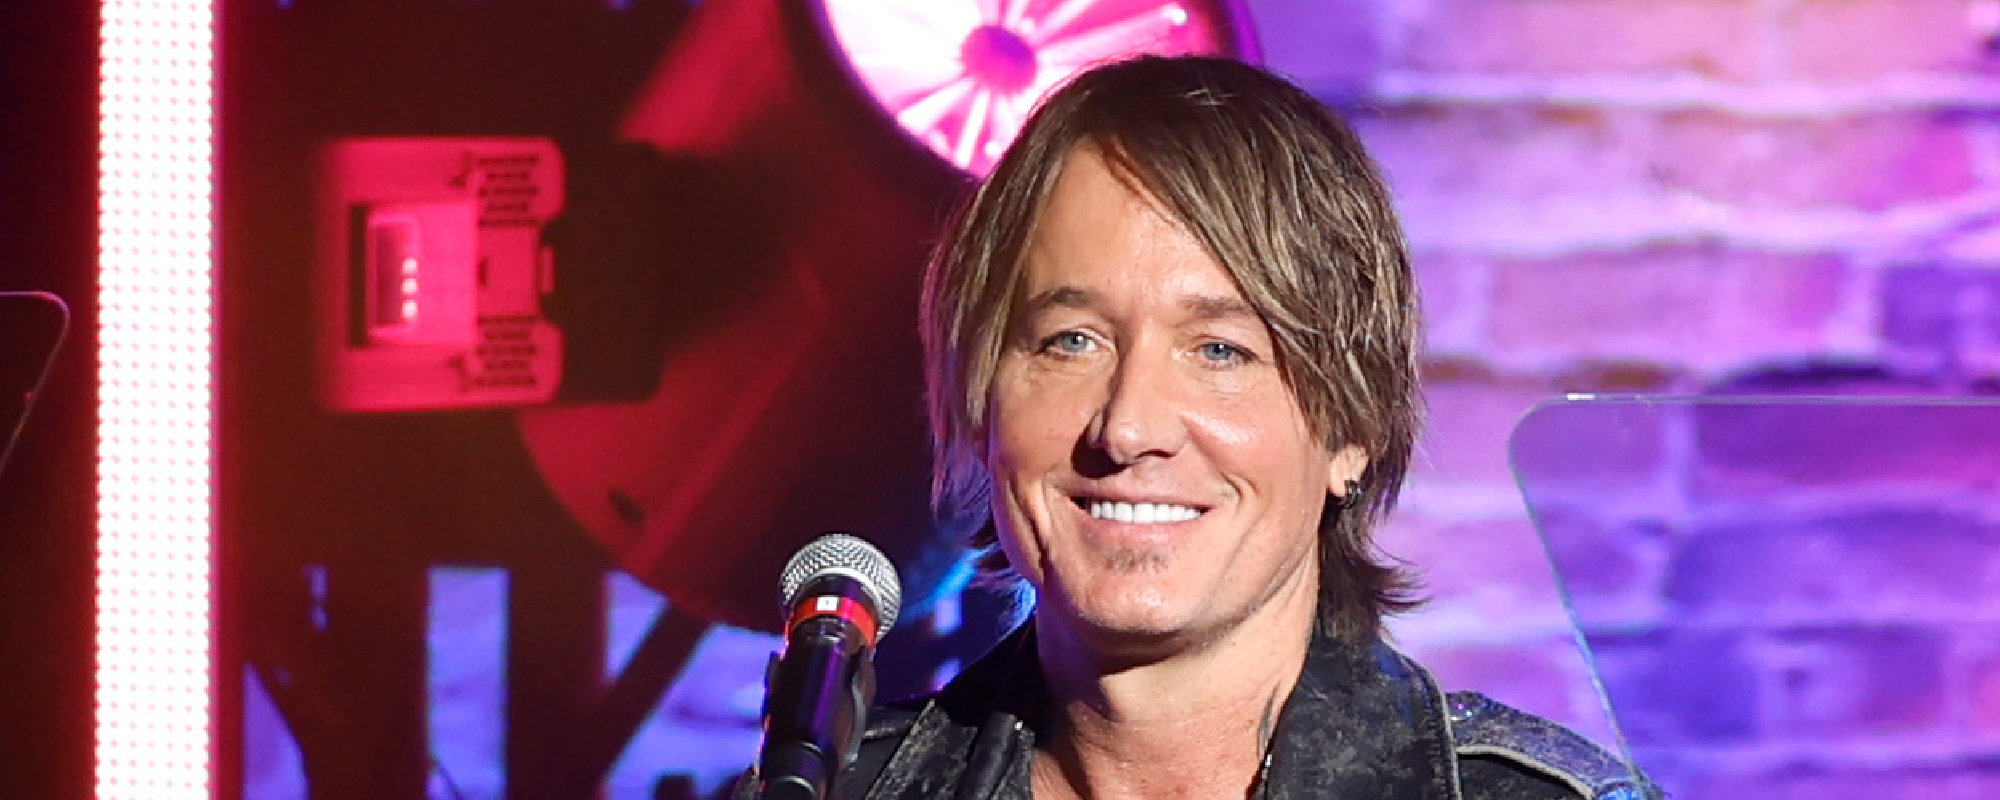 Keith Urban Dominates CMT Music Awards With Special Performance of “Straight Line”